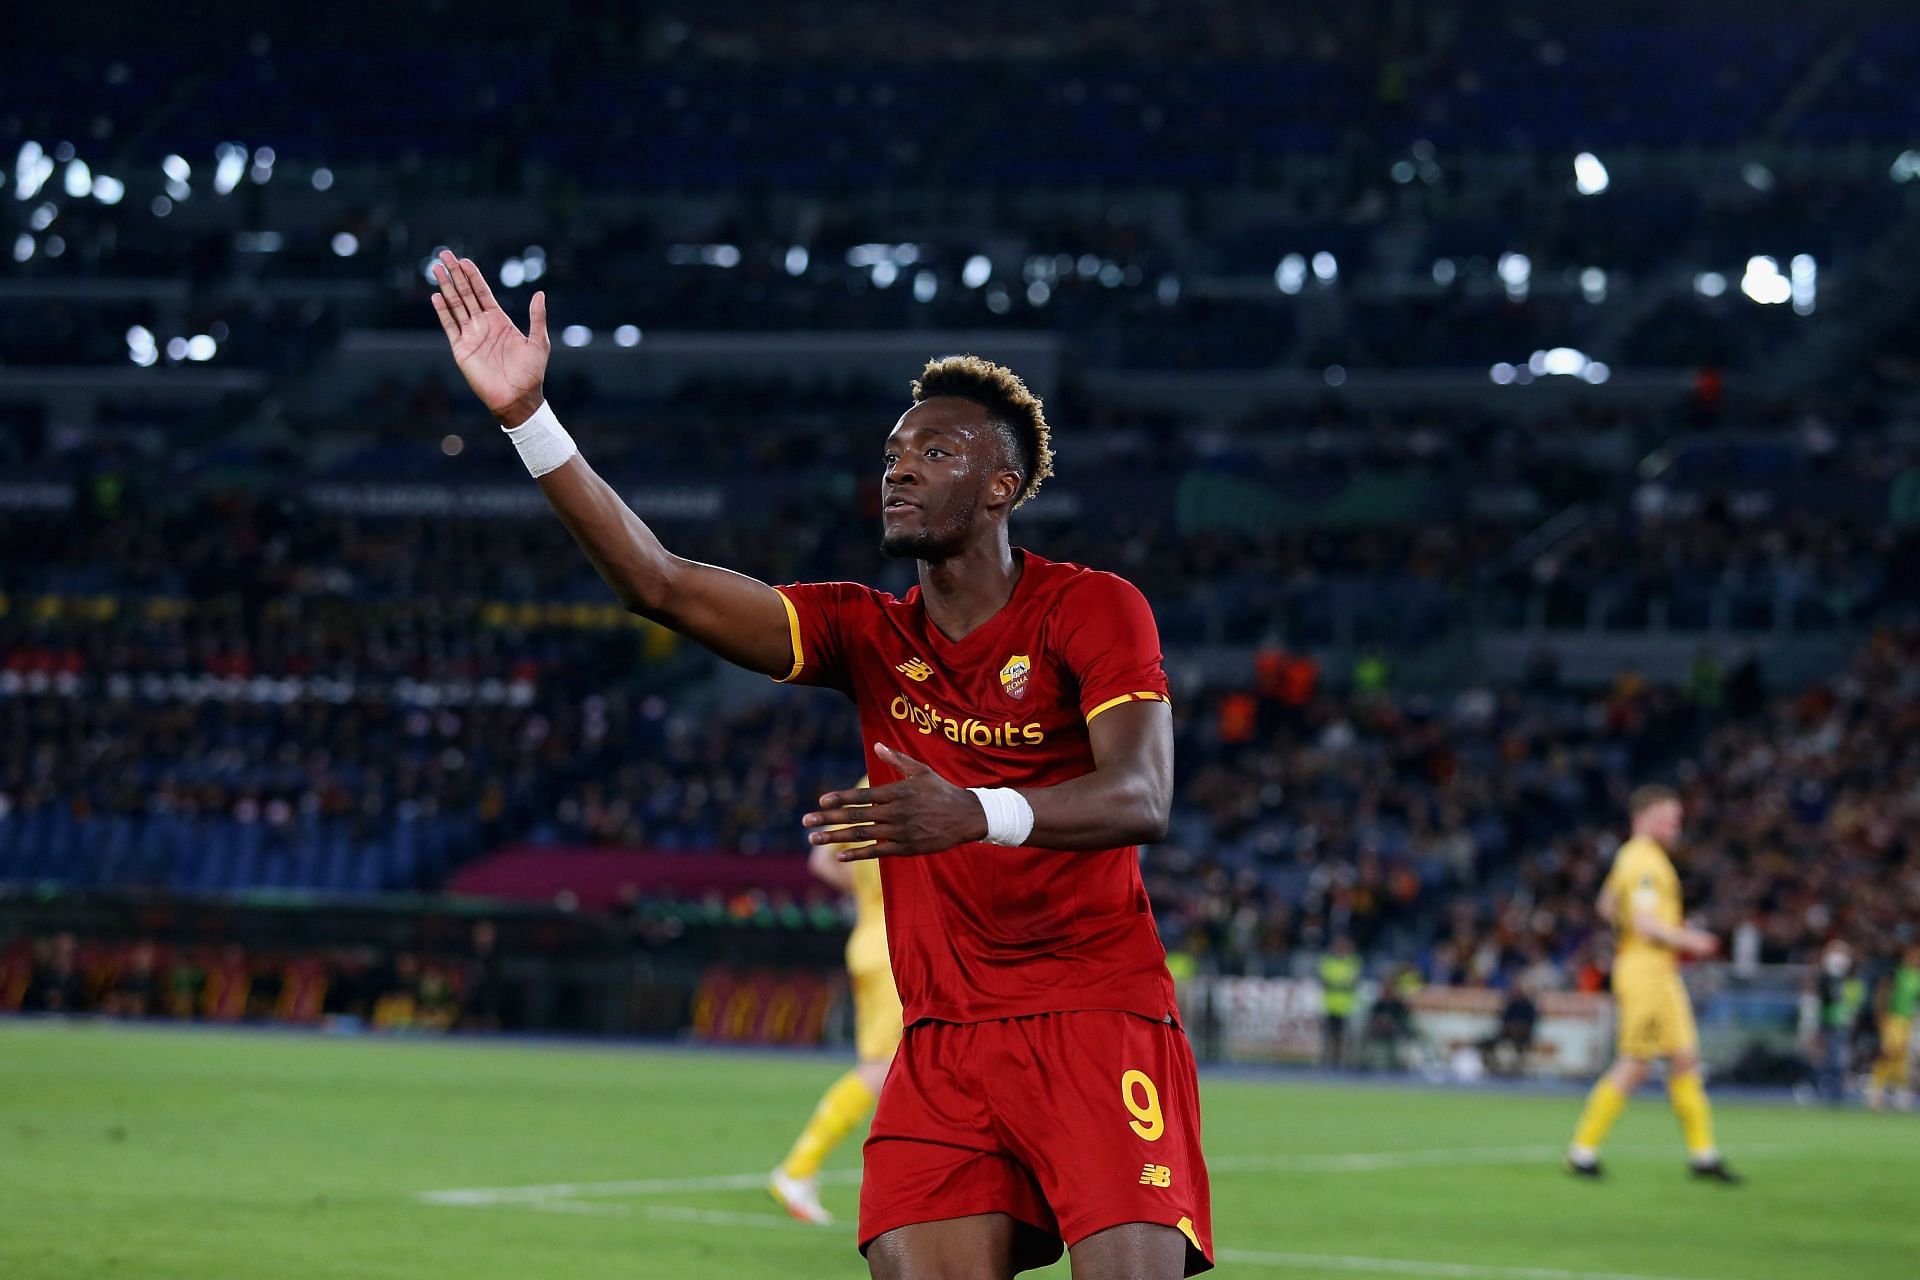 Abraham has scored 24 goals for AS Roma this season